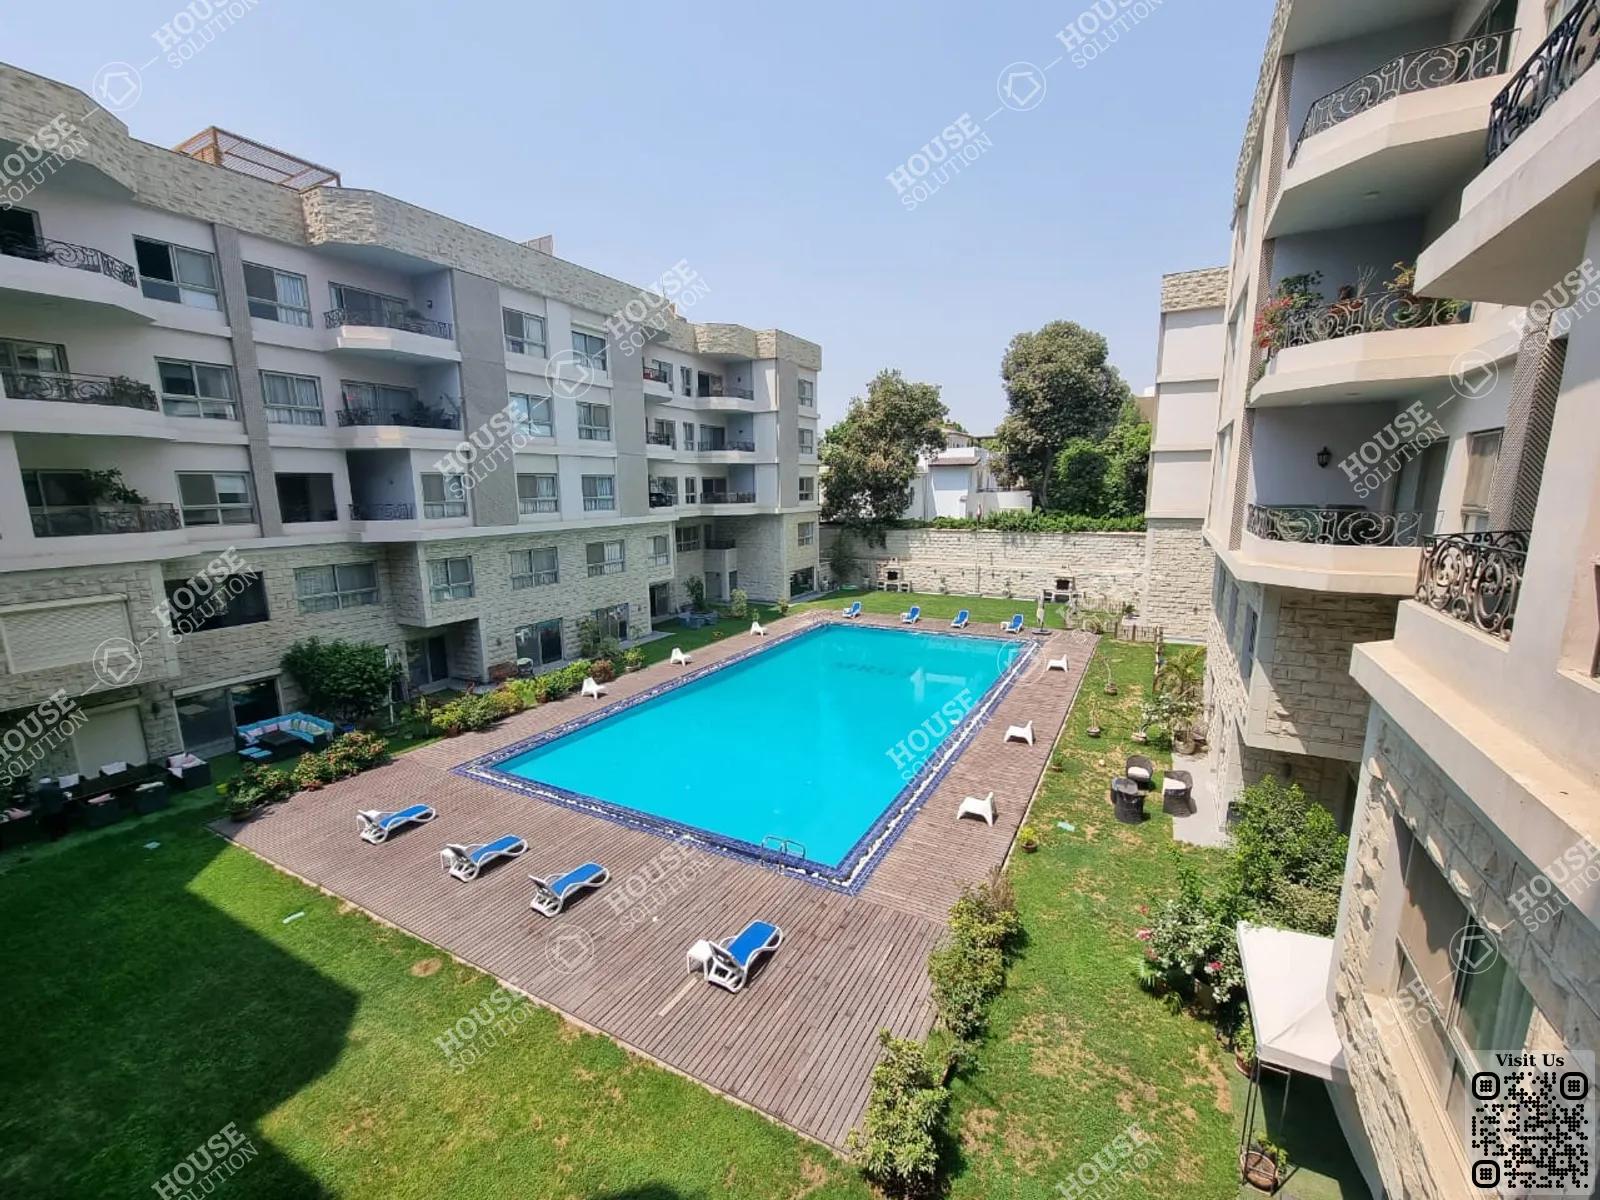 SHARED SWIMMING POOL  @ Apartments For Rent In Maadi Maadi Sarayat Area: 350 m² consists of 3 Bedrooms 4 Bathrooms Furnished 5 stars #4897-1